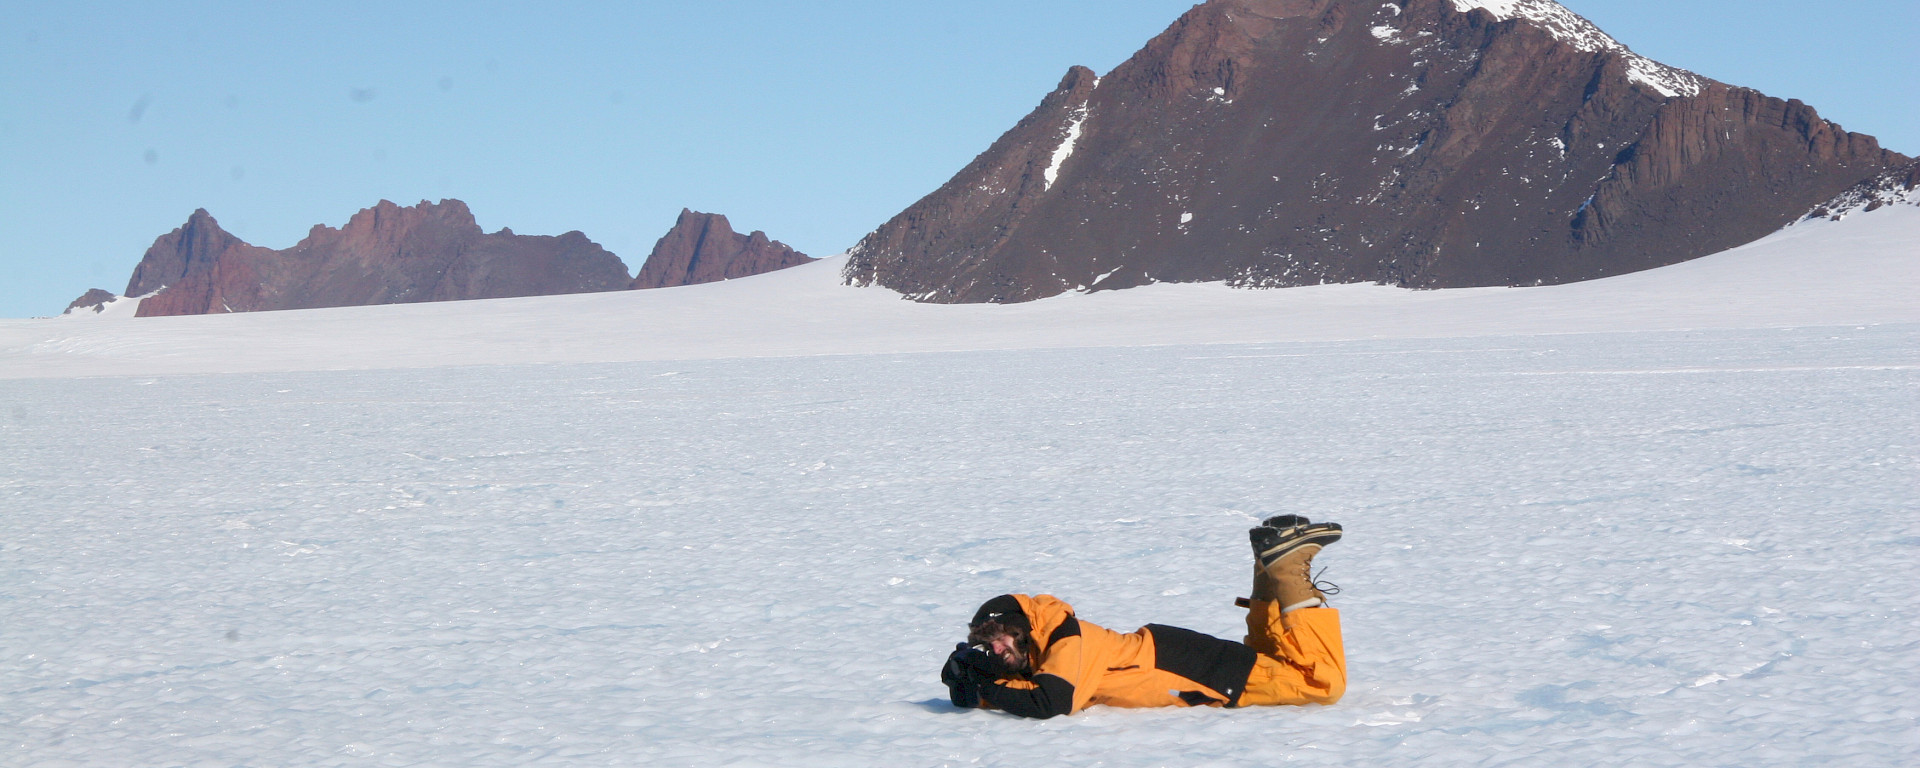 Nick Hutcheson lies on his stomach in the snow in Antarctica, camera in hand, aiming at an unseen subject